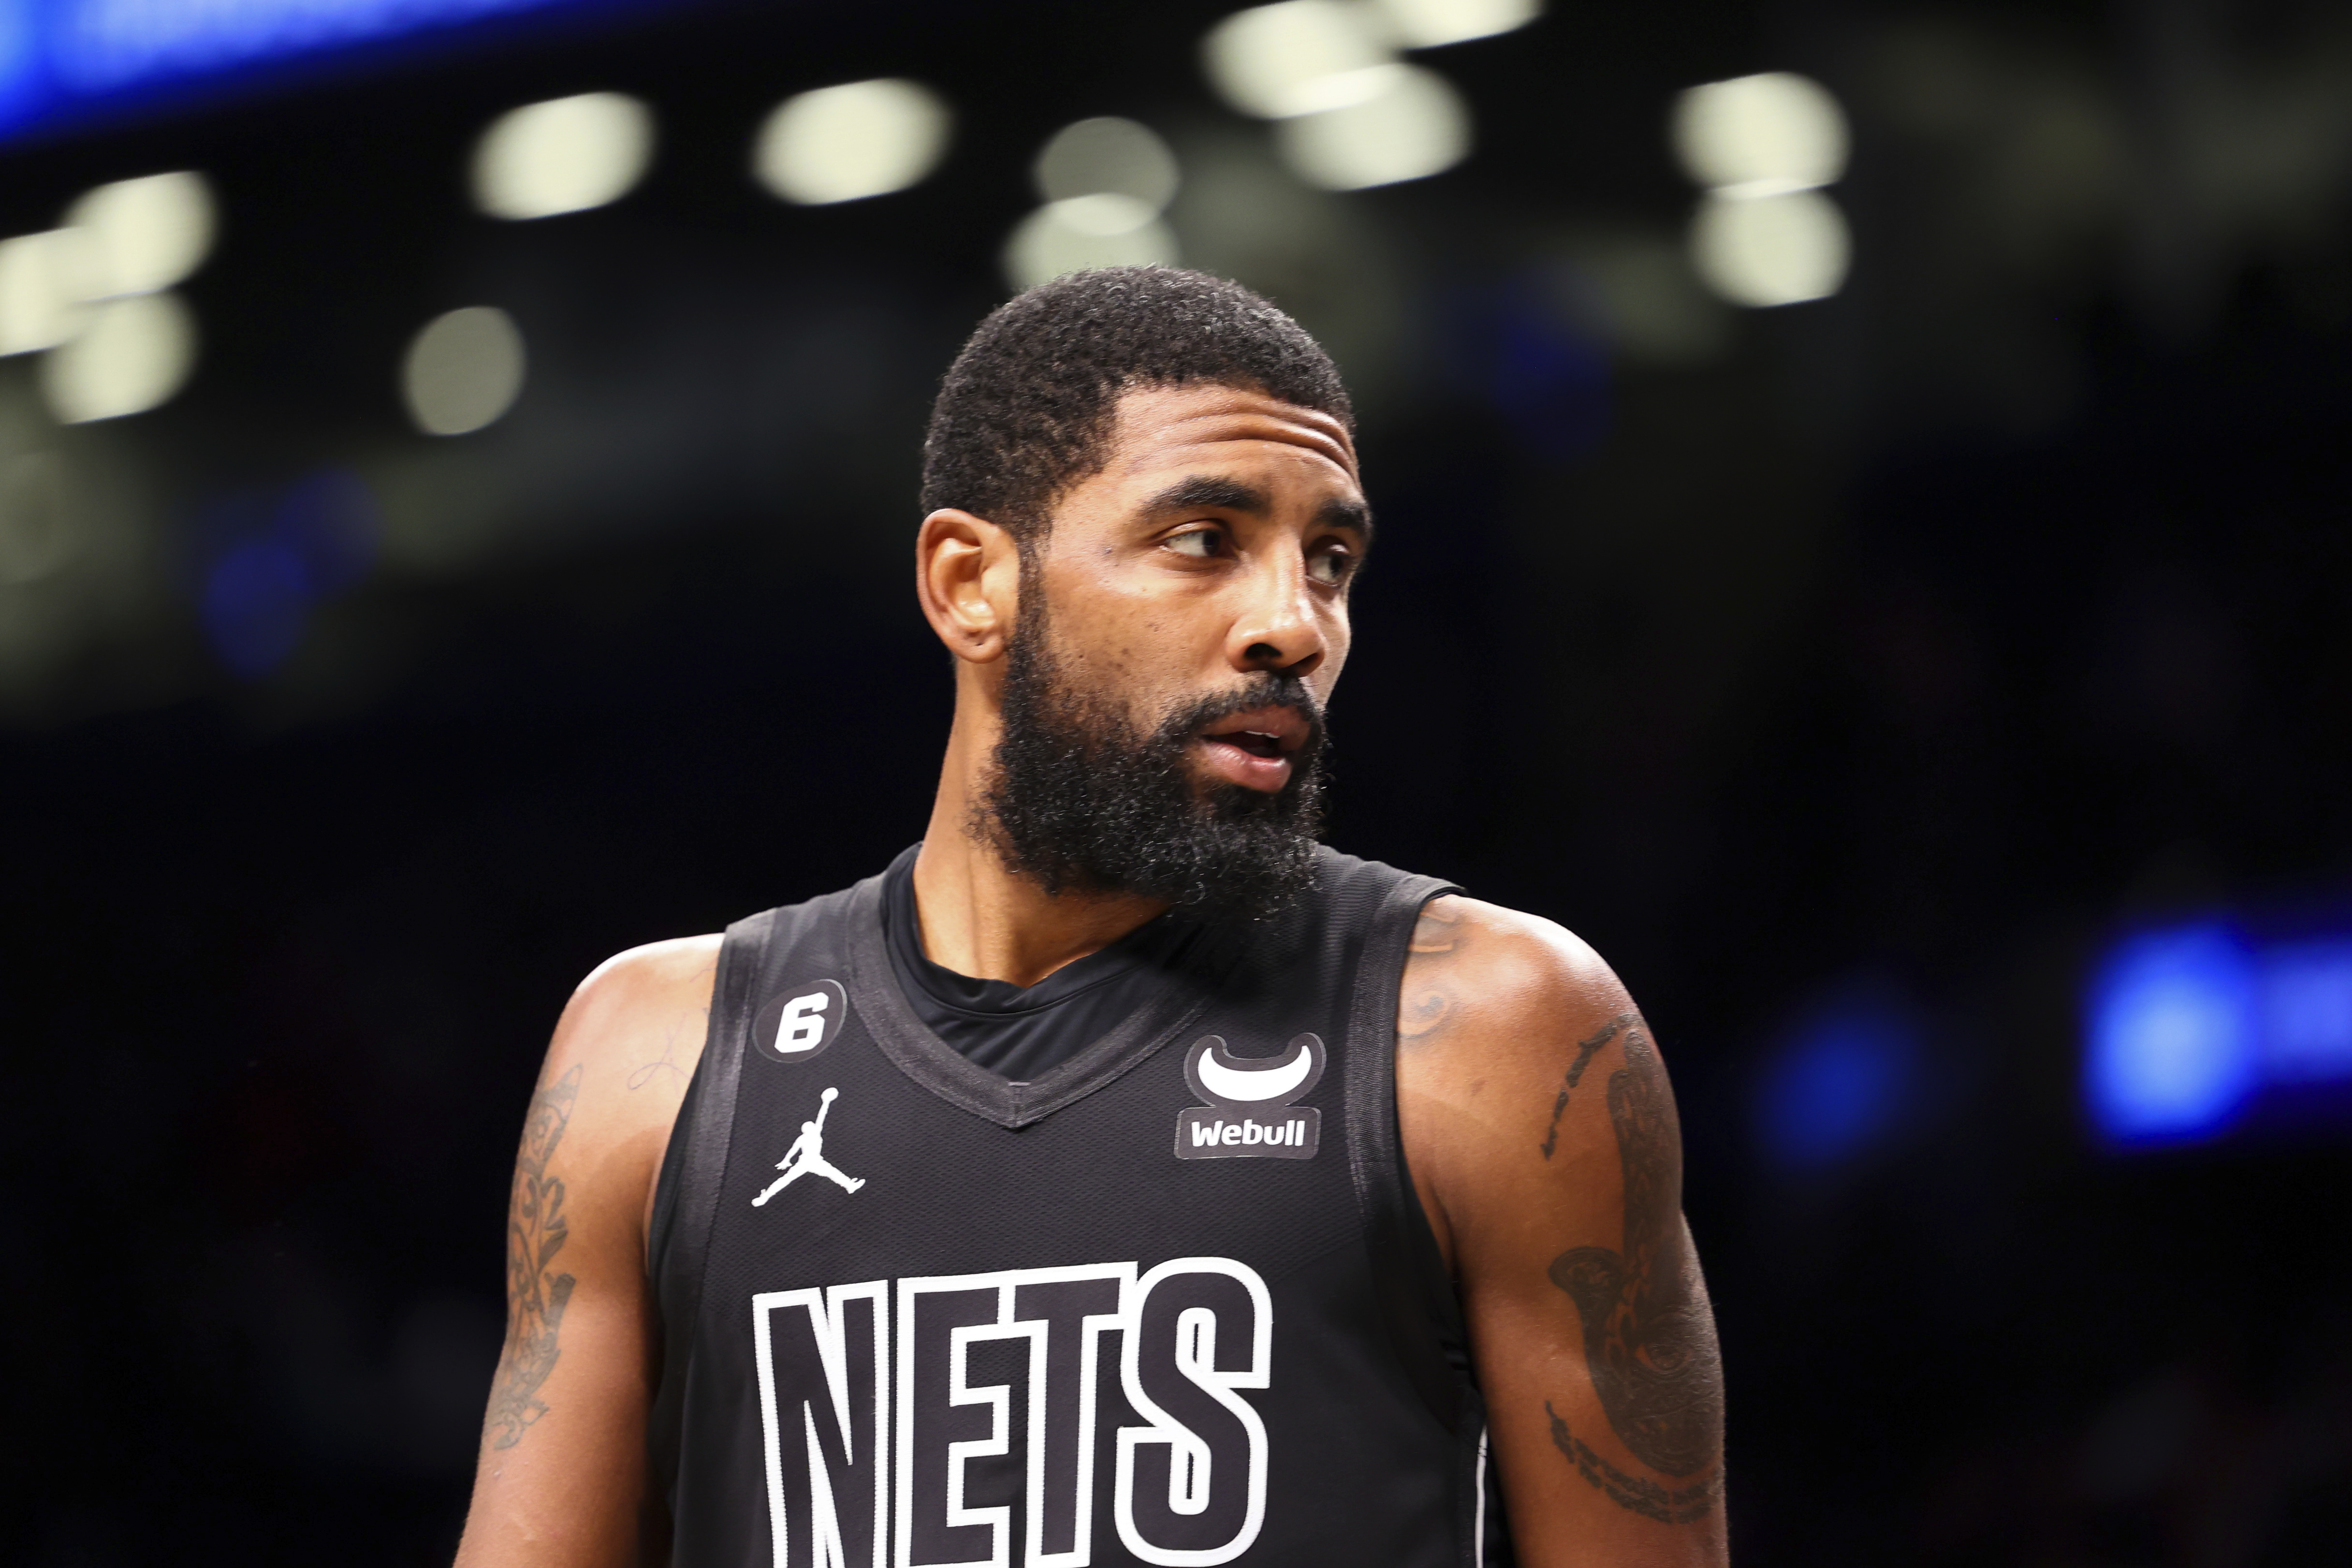 BROOKLYN NETS KYRIE IRVING HG CONCEPT JERSEY